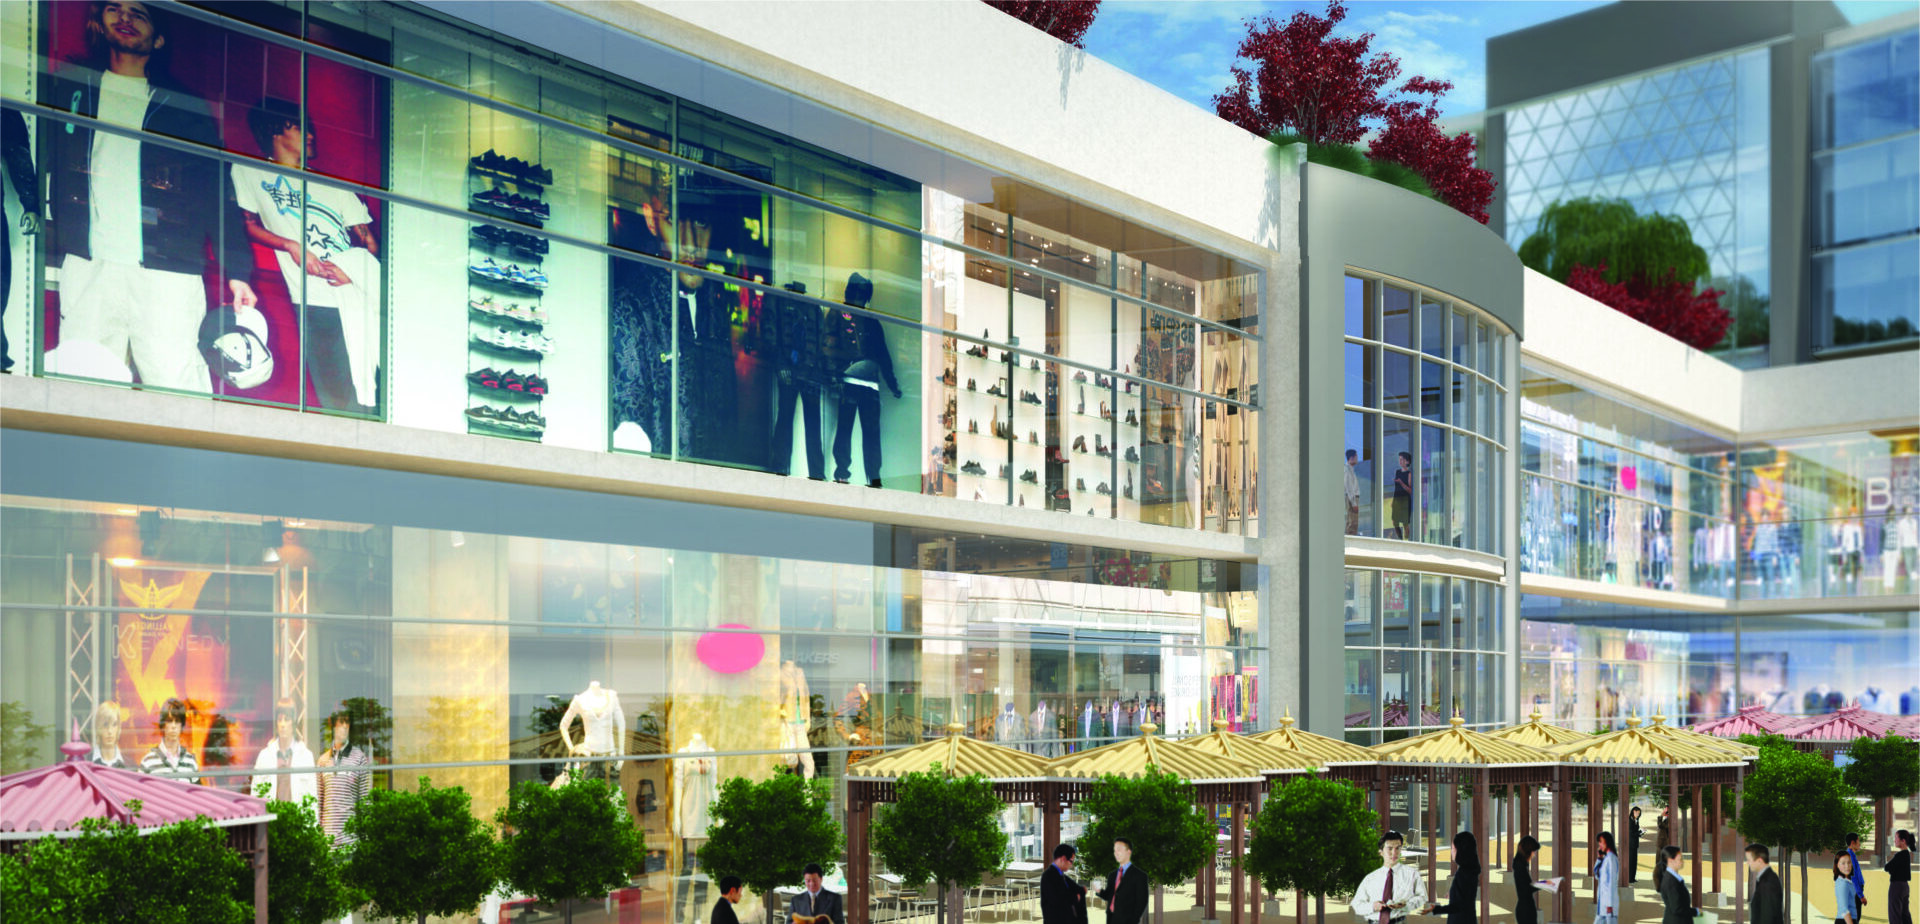 SK009 North Retail Facade Perspective A3 e1702867286246 - Projects